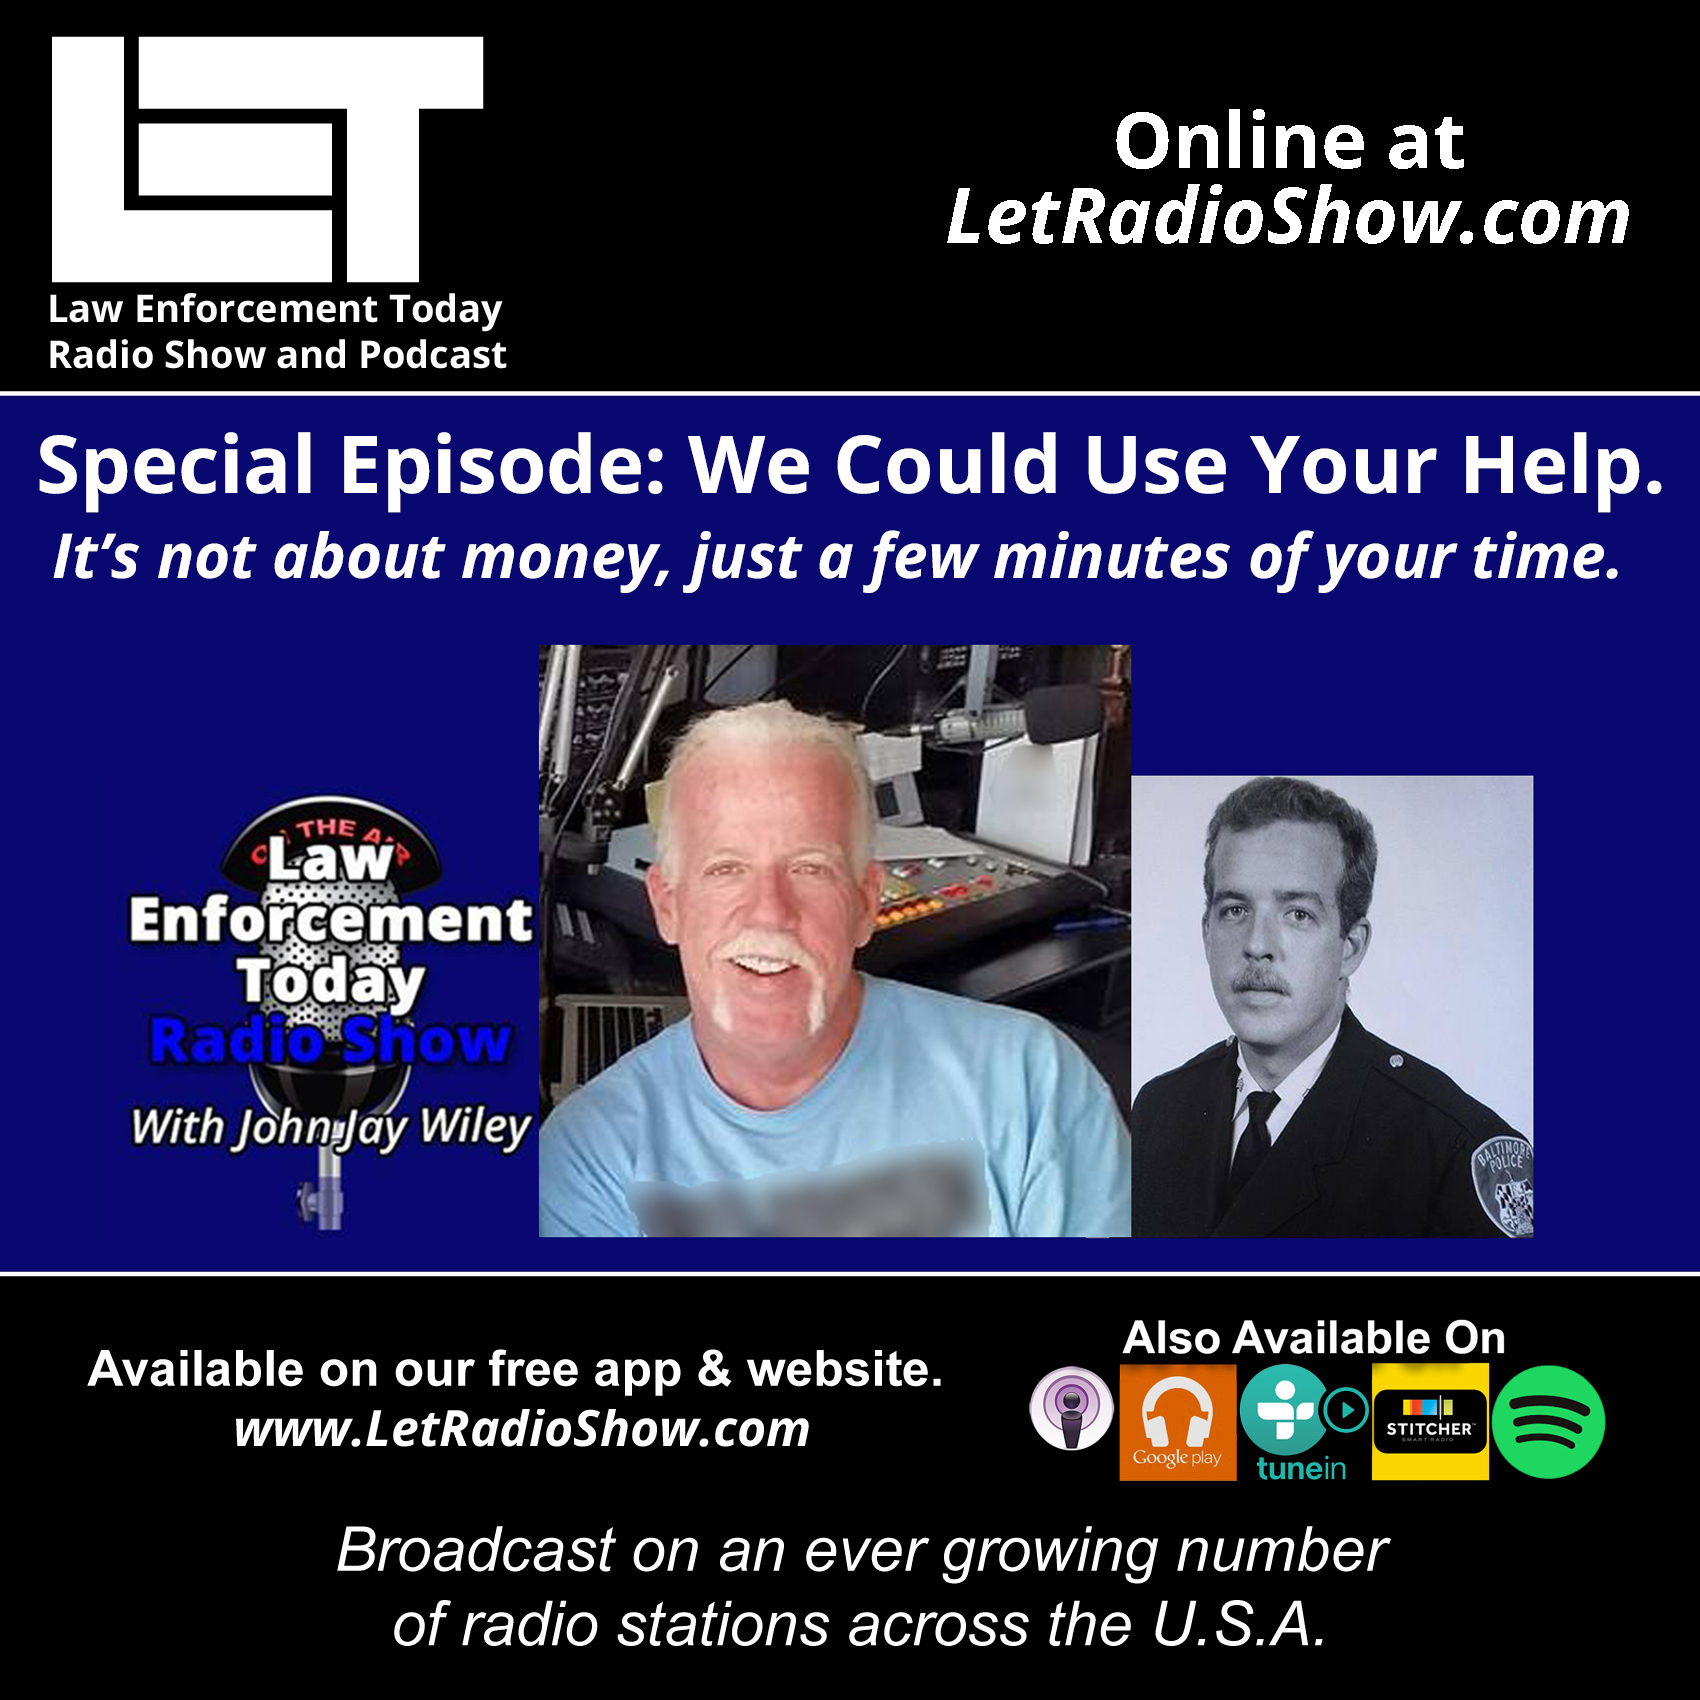 Grow the Podcast. Not with money, just a few minutes of your time.